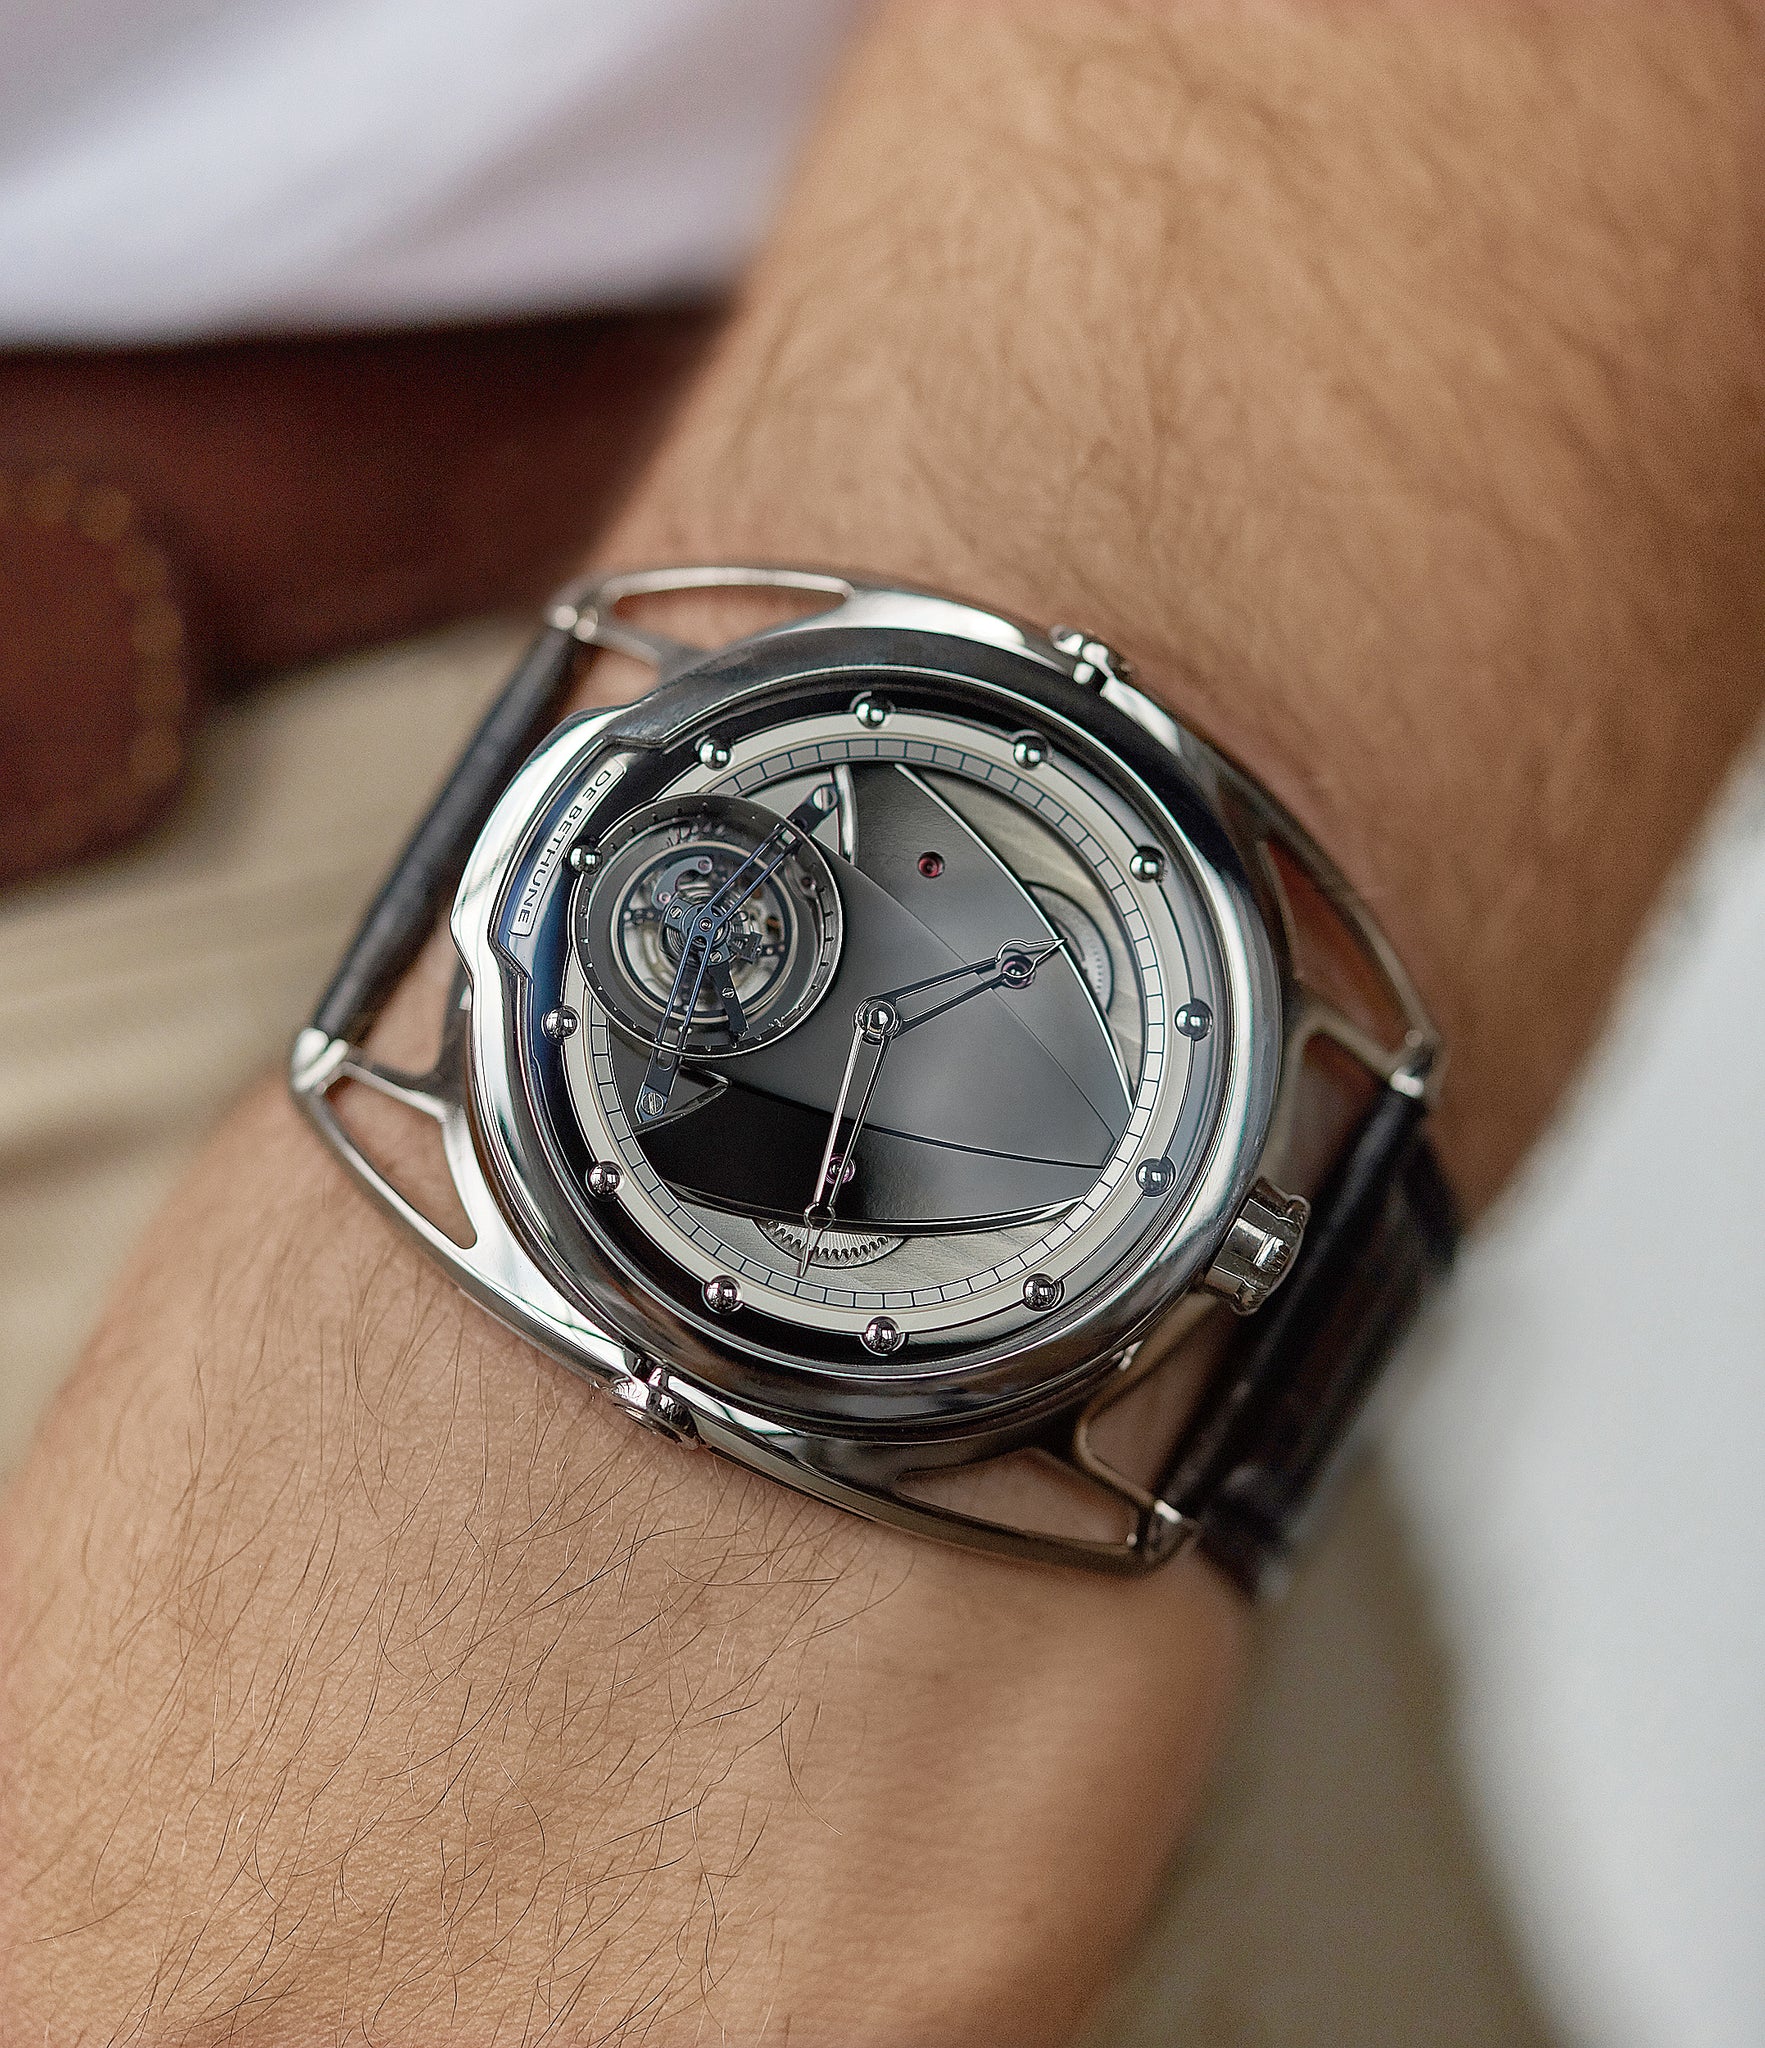 on the wrist De Bethune DB28T tourbillon titanium time-only watch from independent watchmaker for sale online at A Collected Man London UK specialist of rare watches